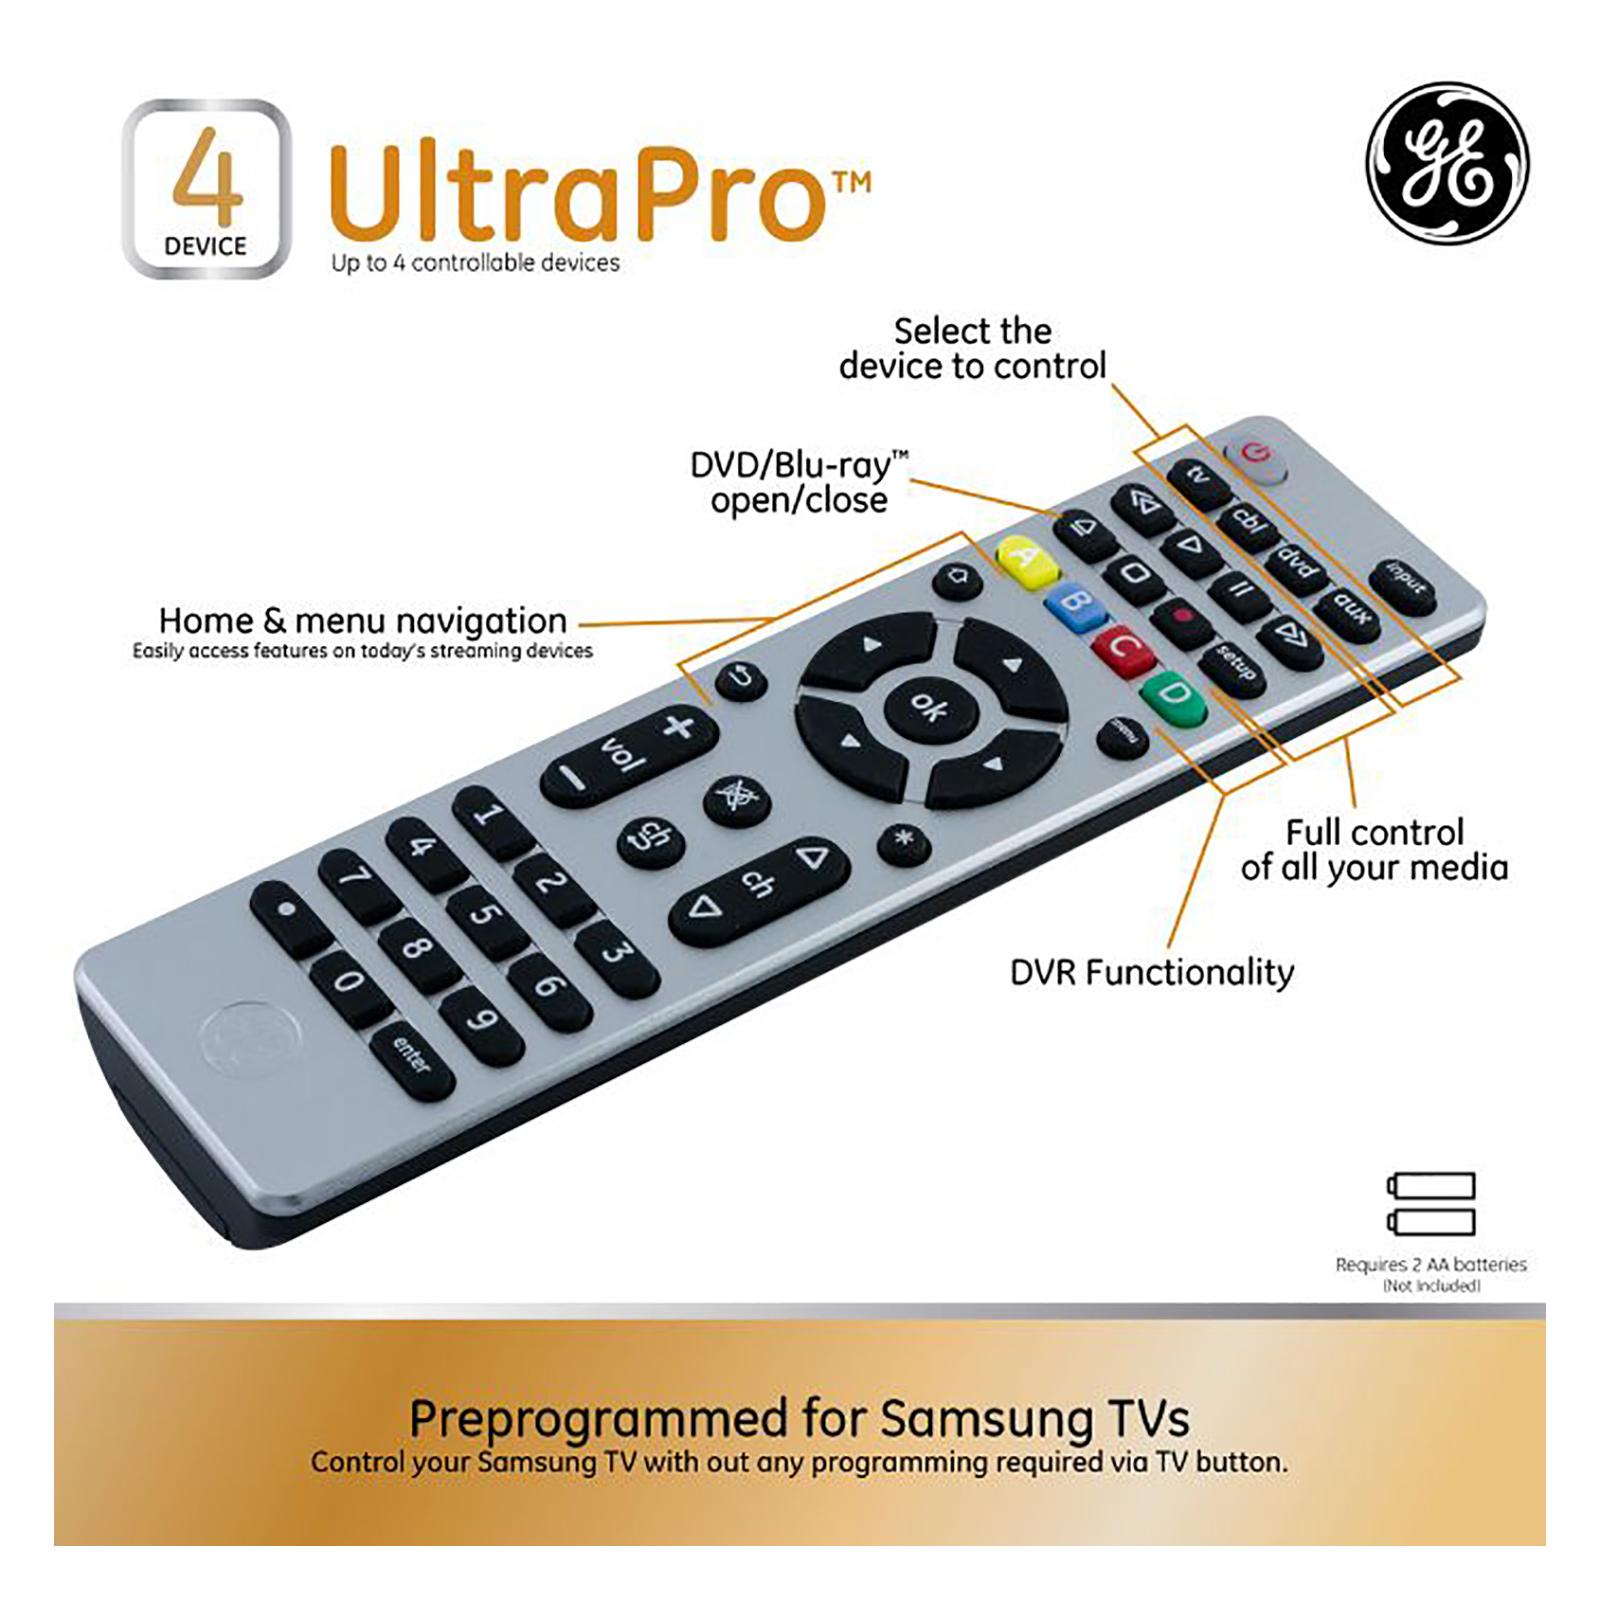 Preprogrammed for Samsung TVs: Control your Samsung TV with out any programming required via TV Button. 4 Device - UltraPro: Up to 4 controllable devices. Select the device to control. Full control of all your media. DVD/Blu-ray open/close. DVR Functionality. Home & menu navigation (Easily access features on today's streaming devices)